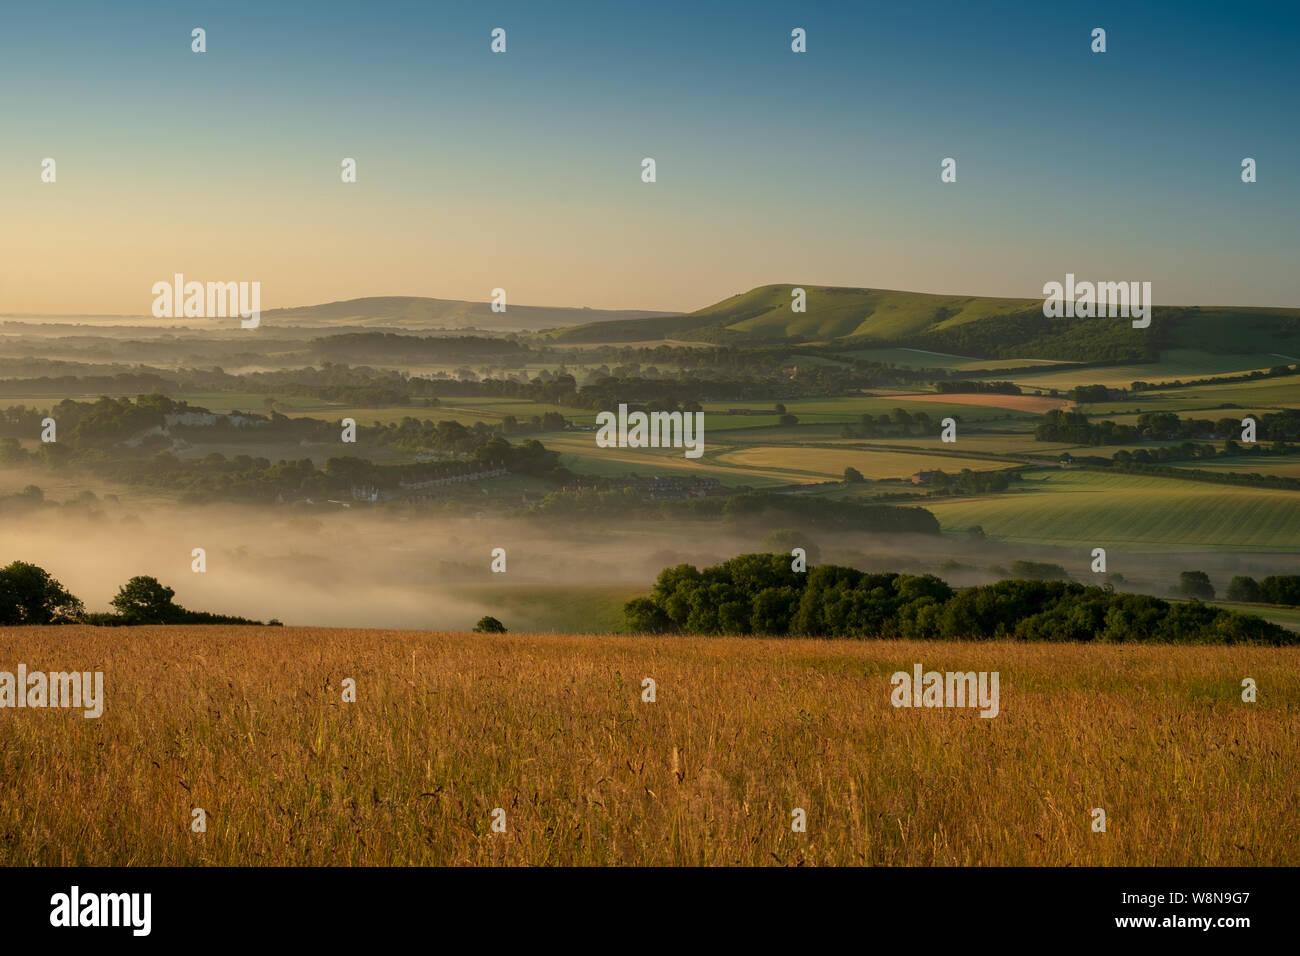 Looking over cornfields to early morning mist rising in the weald between Beddingham Hill and Firle Beacon, East Sussex 4 Stock Photo